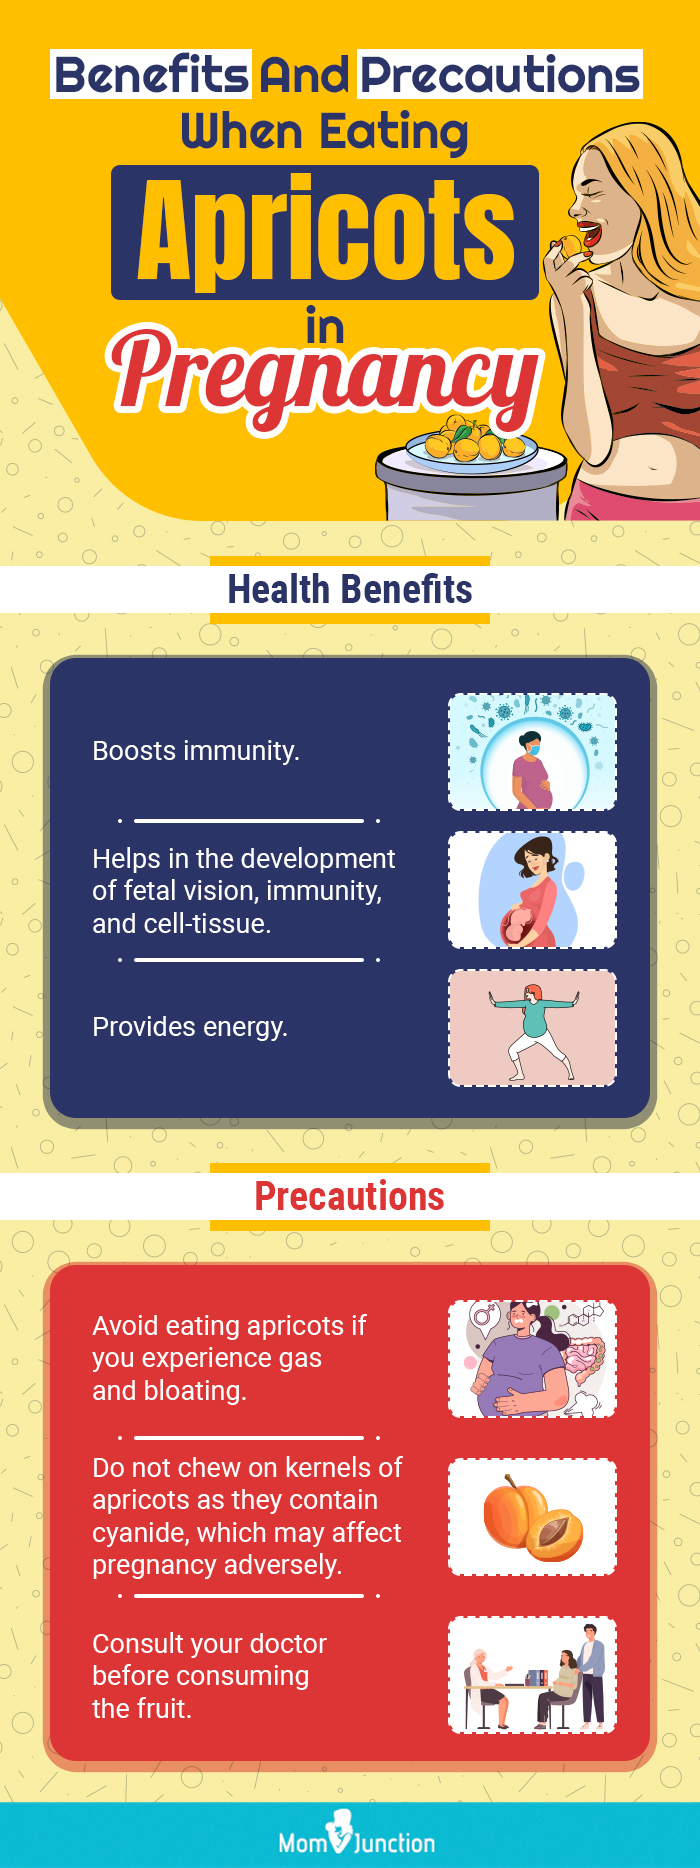 benefits and precautions when eating apricots in pregnancy (infographic)